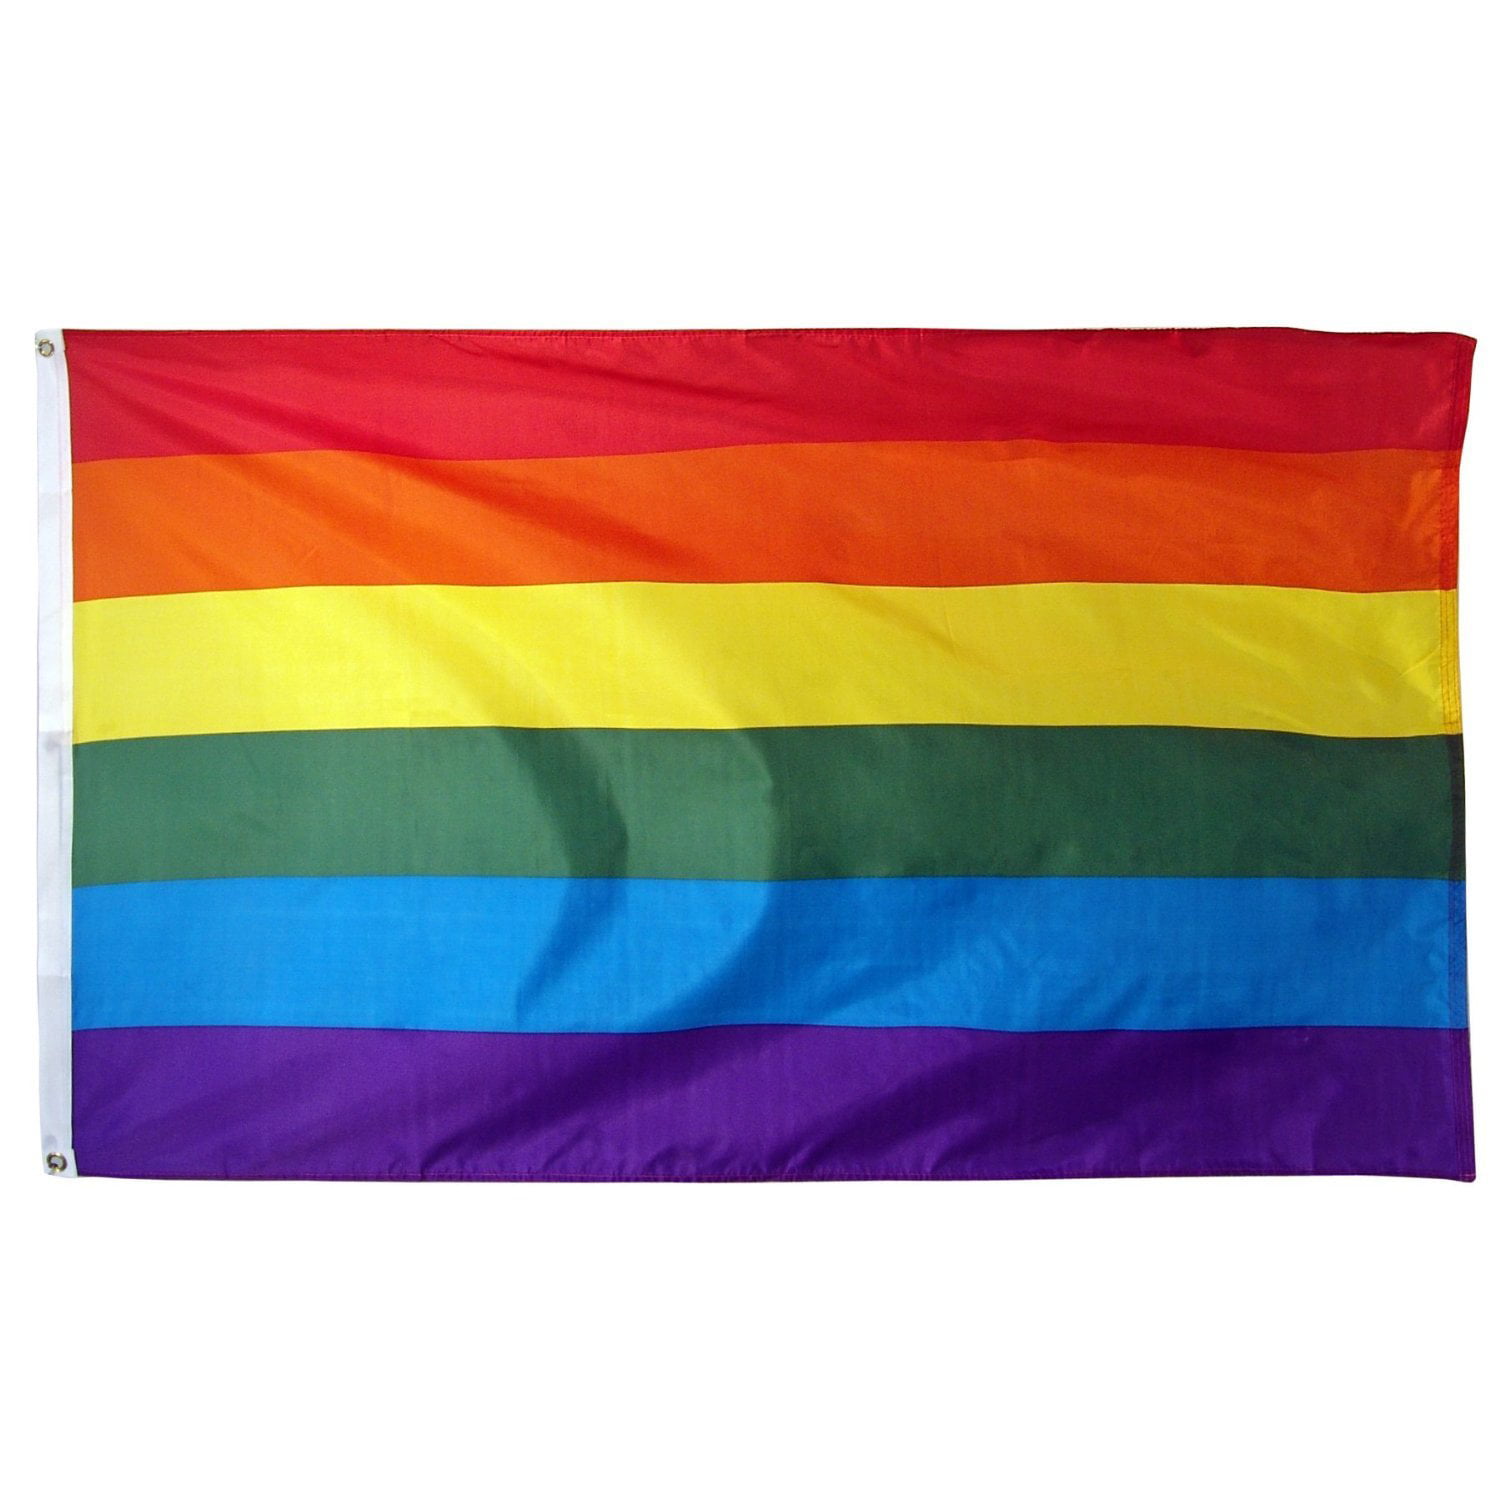 Big 3 x 5 FT Rainbow Polyester Flag Gay Pride Lesbian Peace LGBT with Grommets 